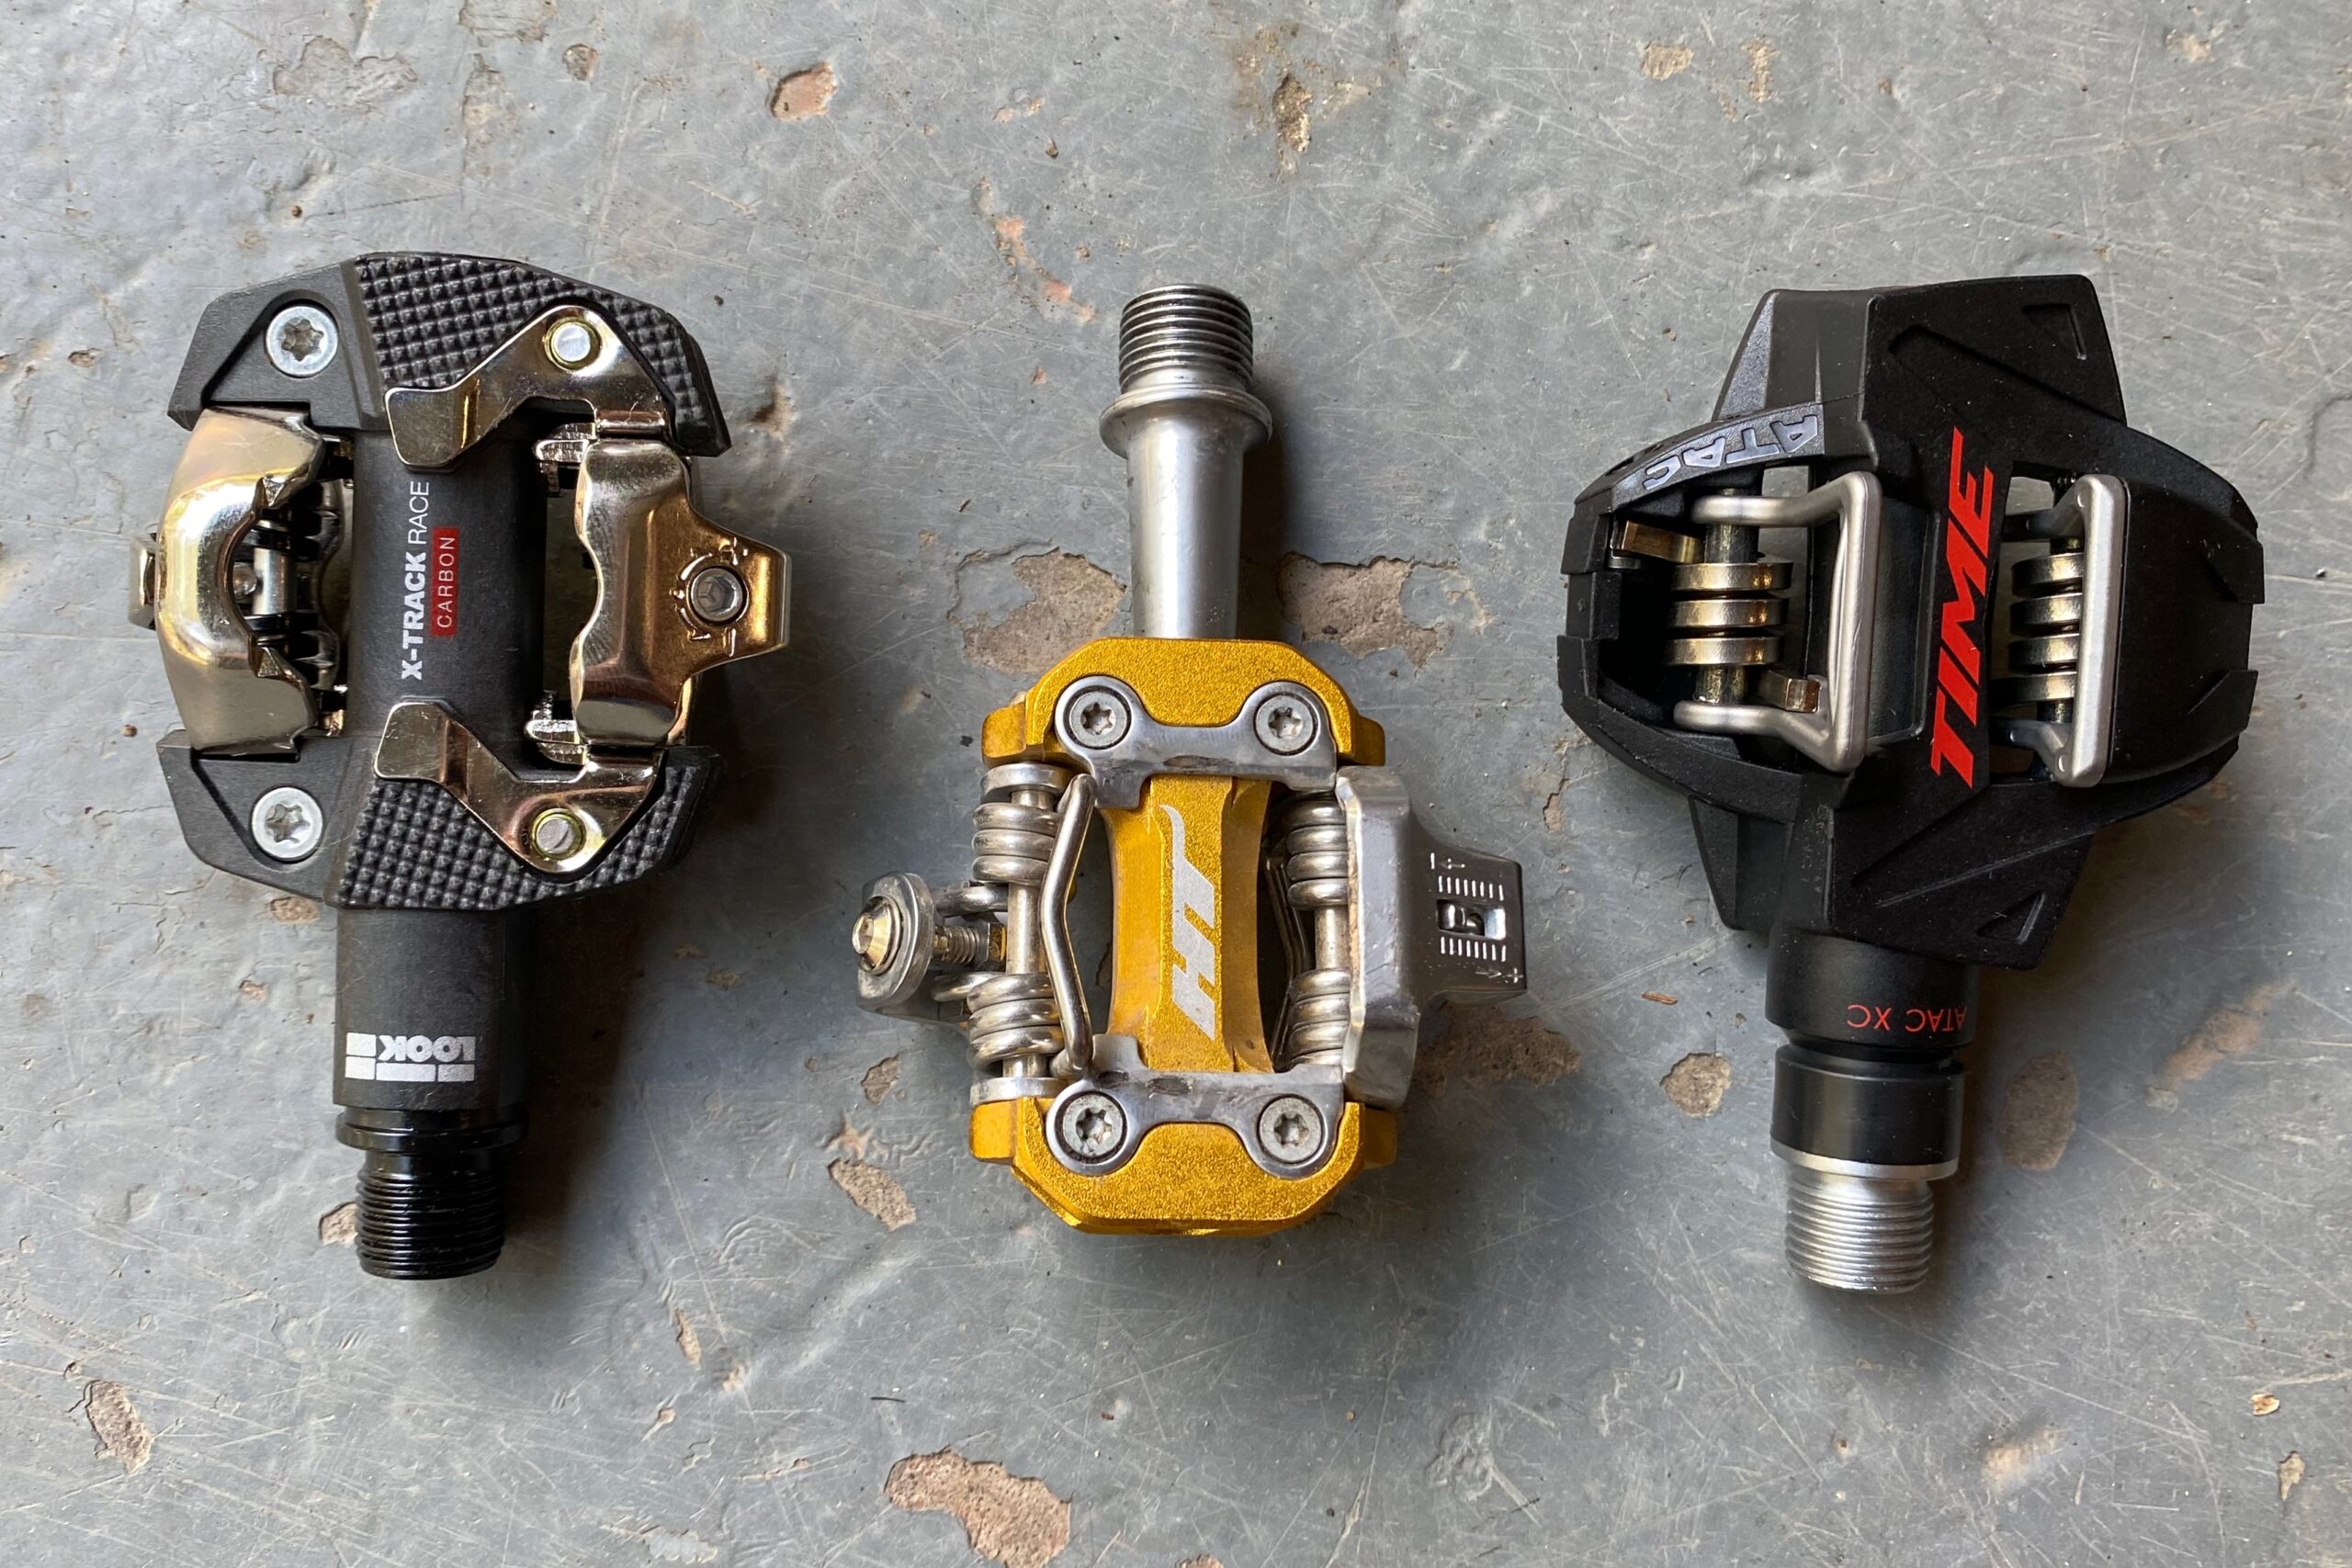 Examples of mountain bike pedals for cross-country riding